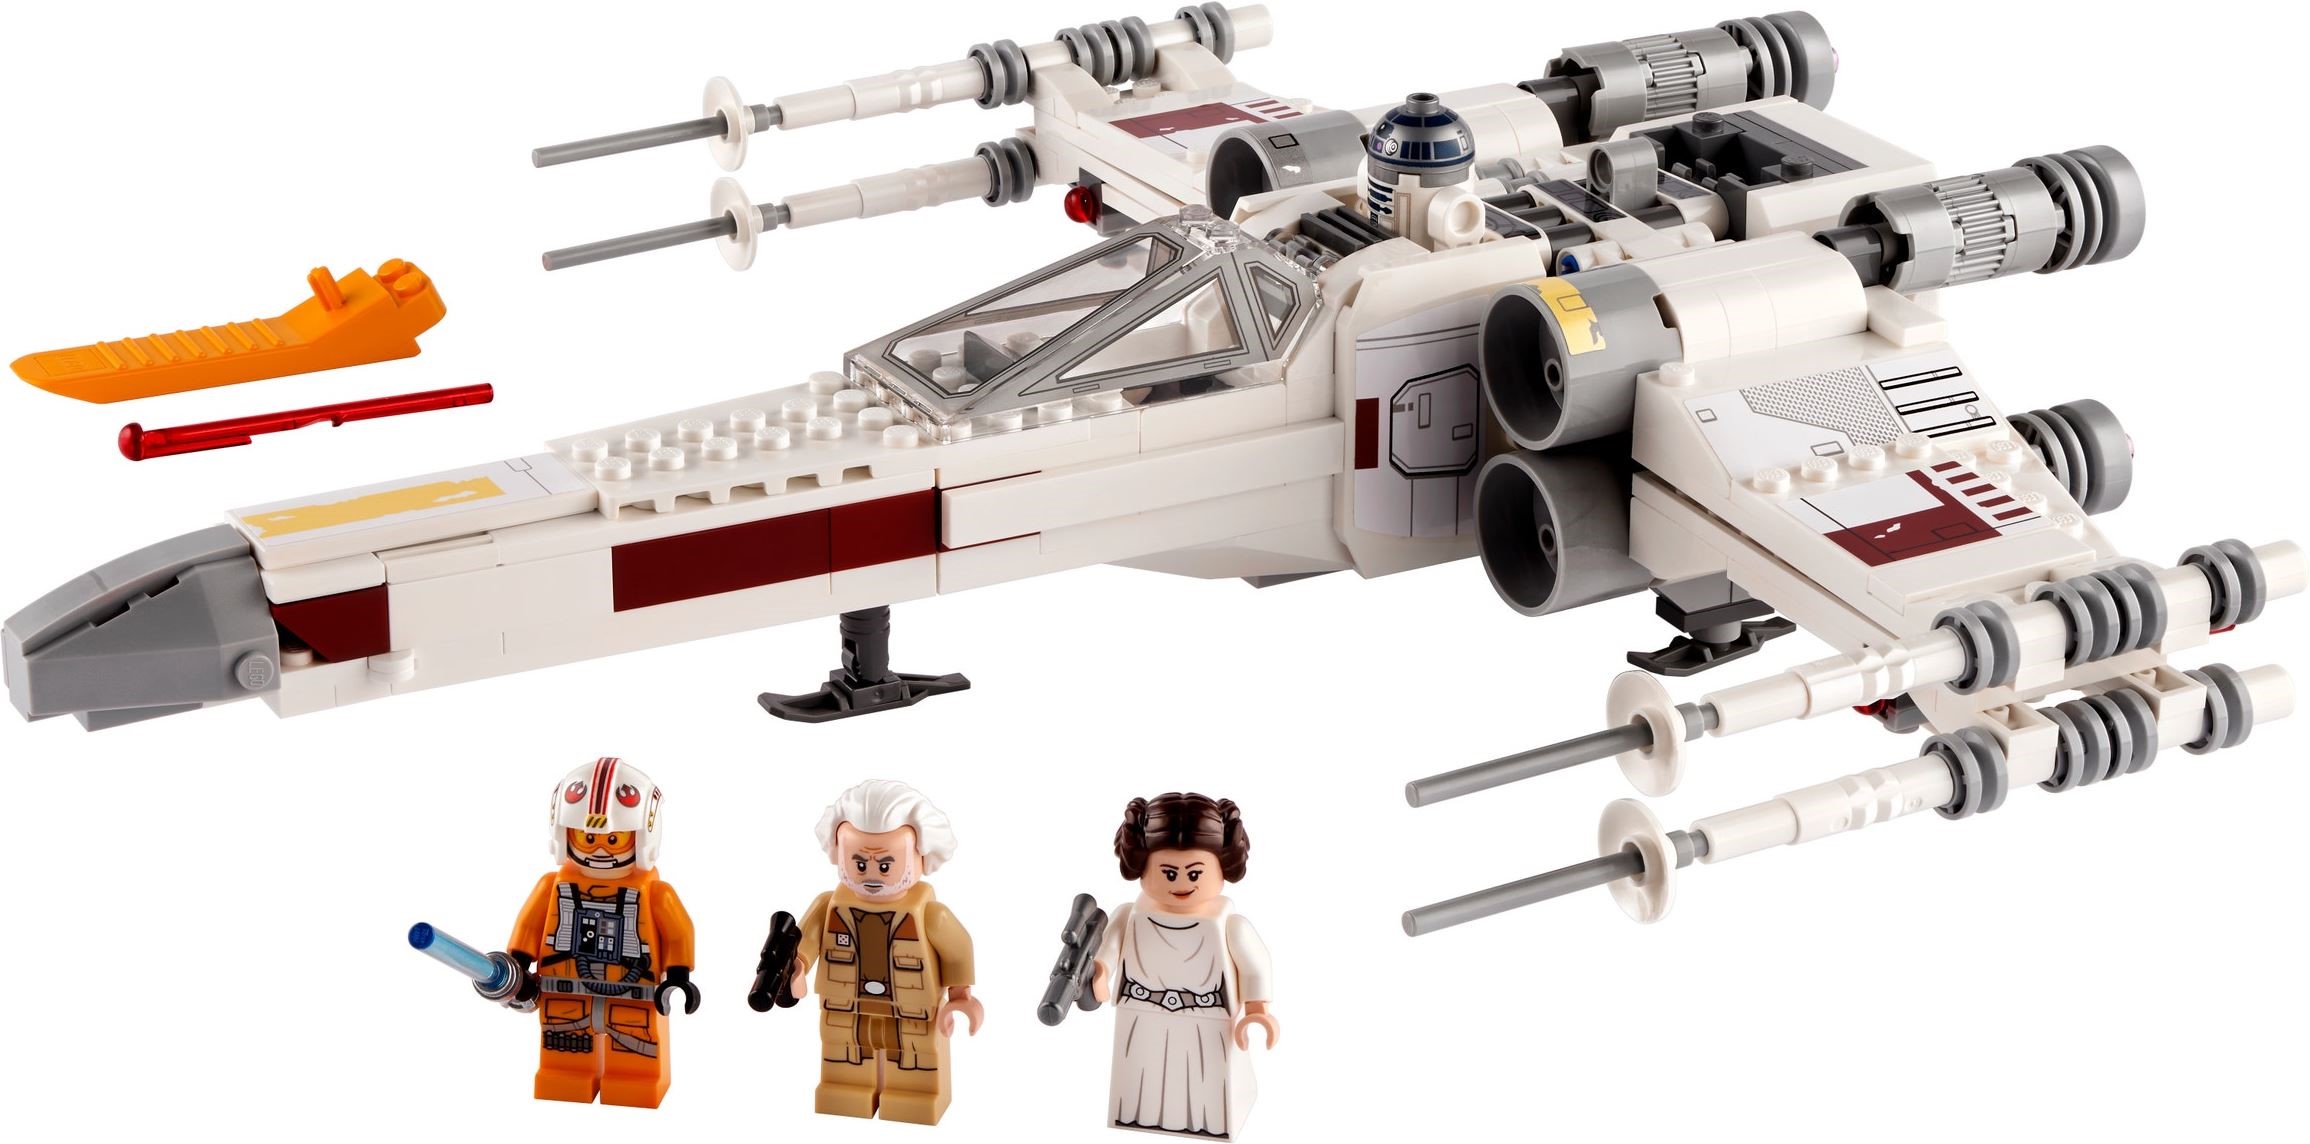 Lego Star Wars Minifigures loose removed from brand new Lego building sets